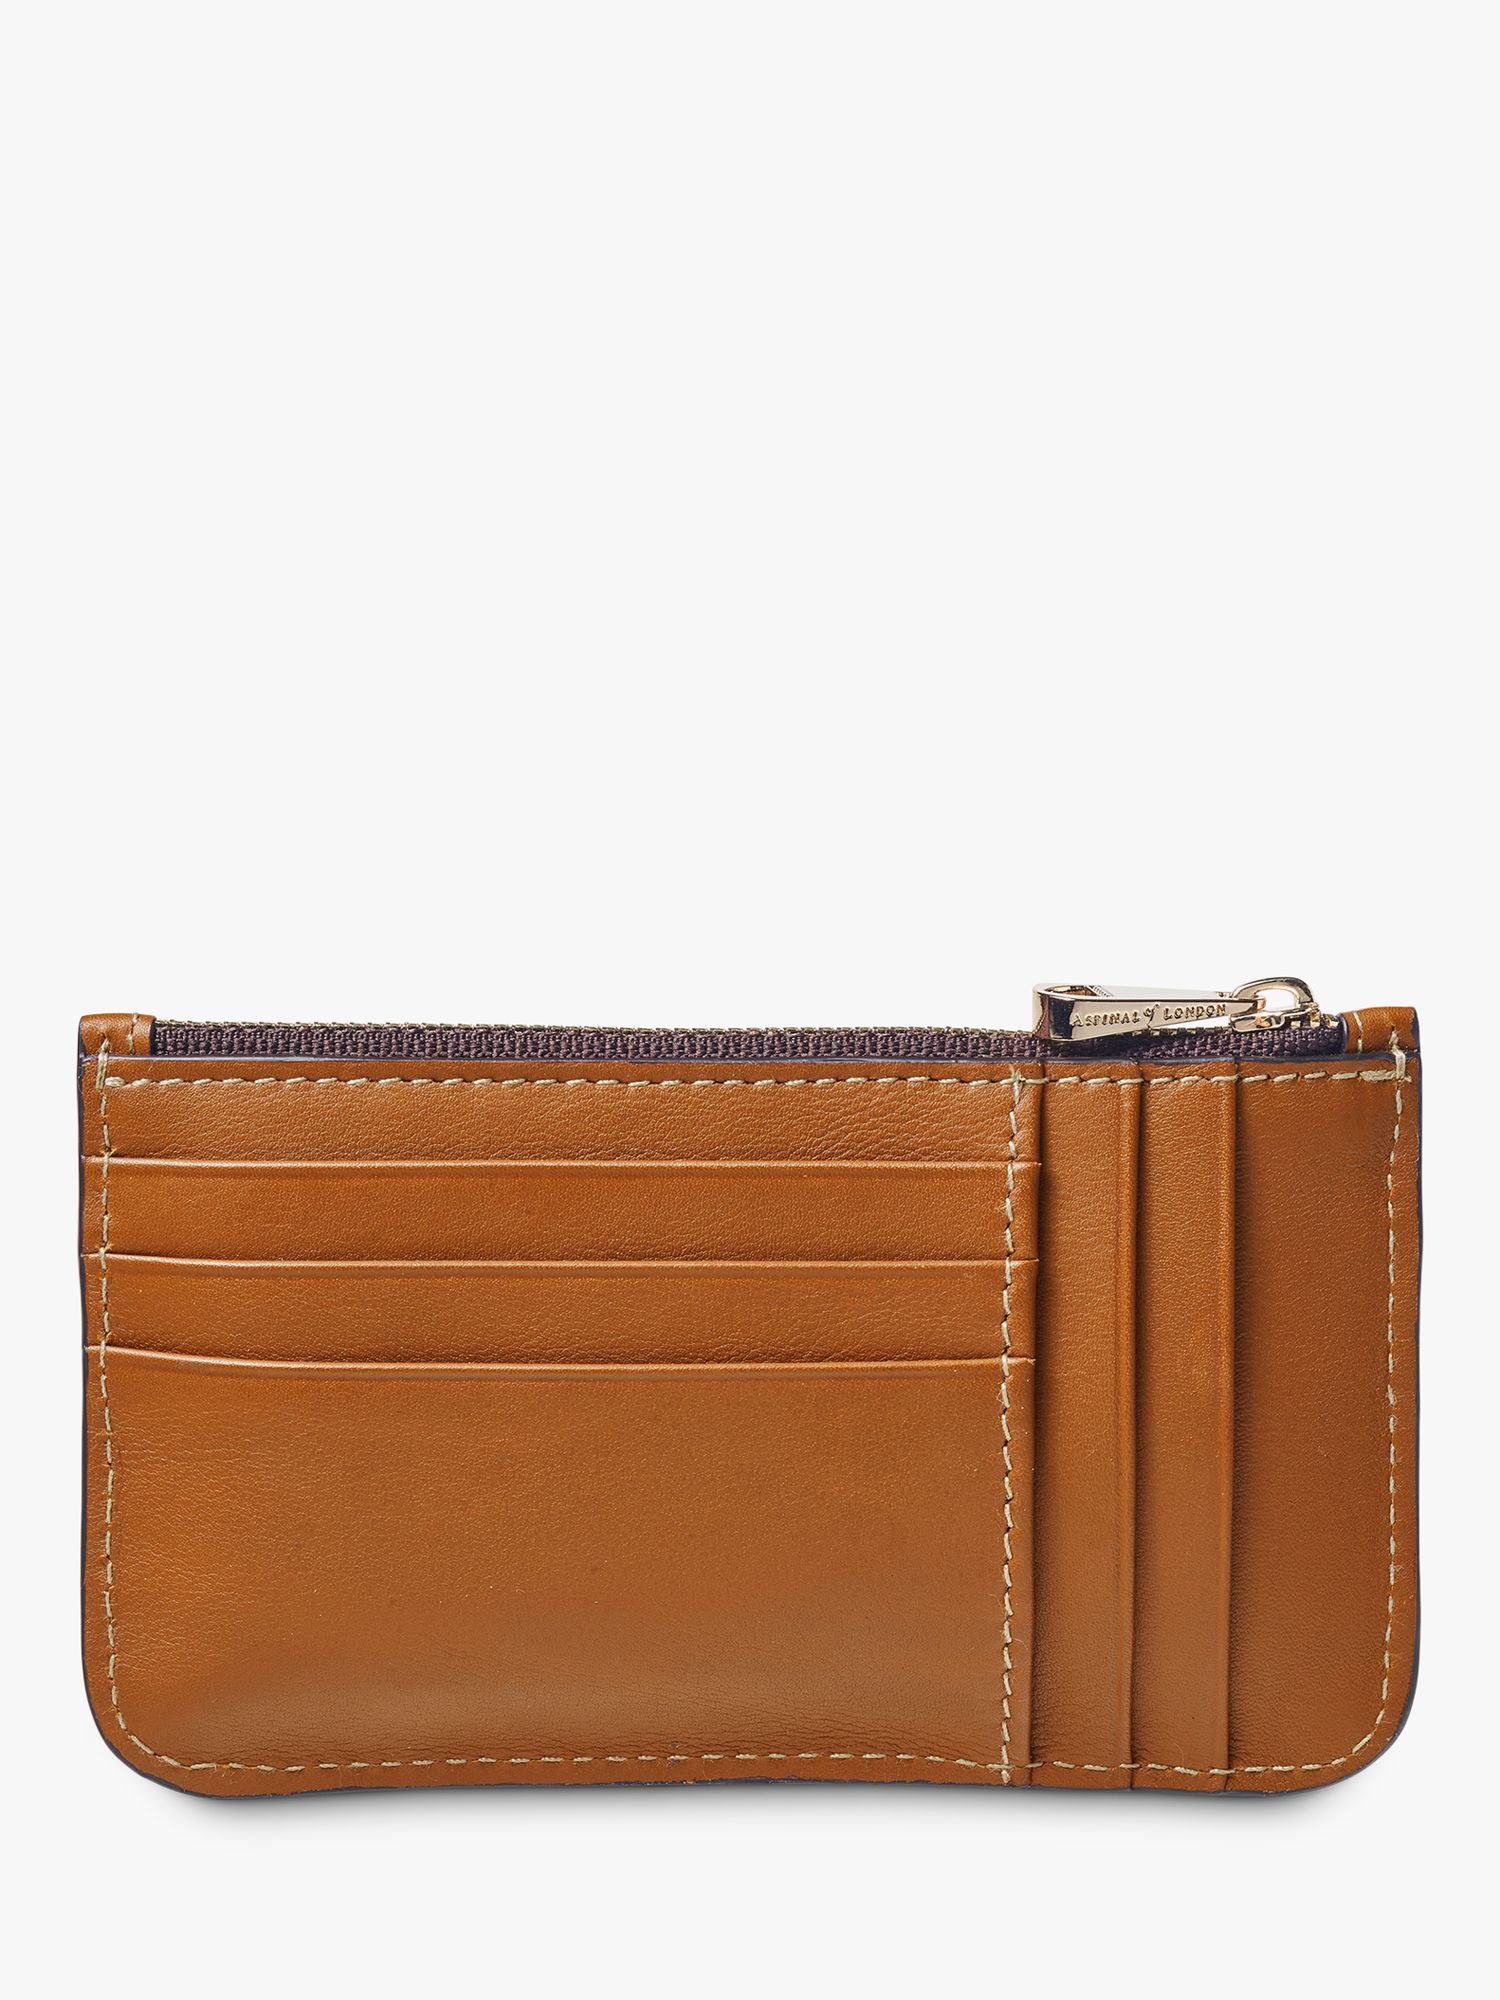 Buy Aspinal of London Ella Leather Card and Coin Holder Online at johnlewis.com